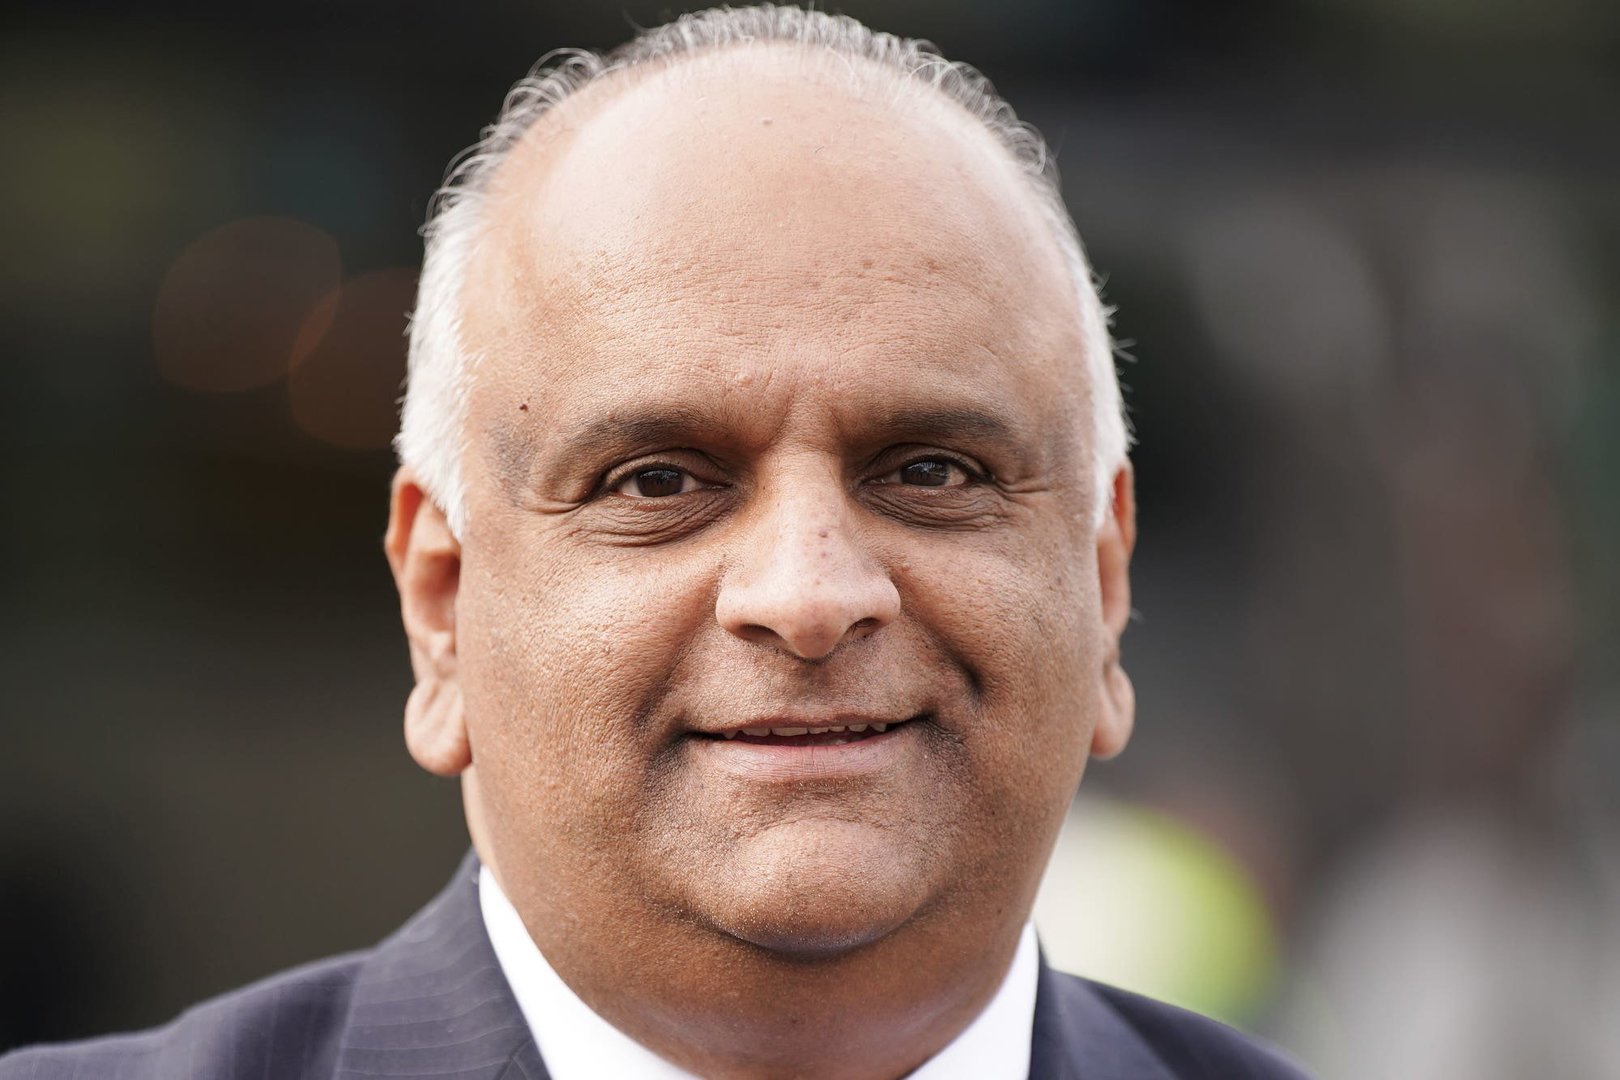 Labour Party Withdraws Support for Rochdale Candidate Azhar Ali